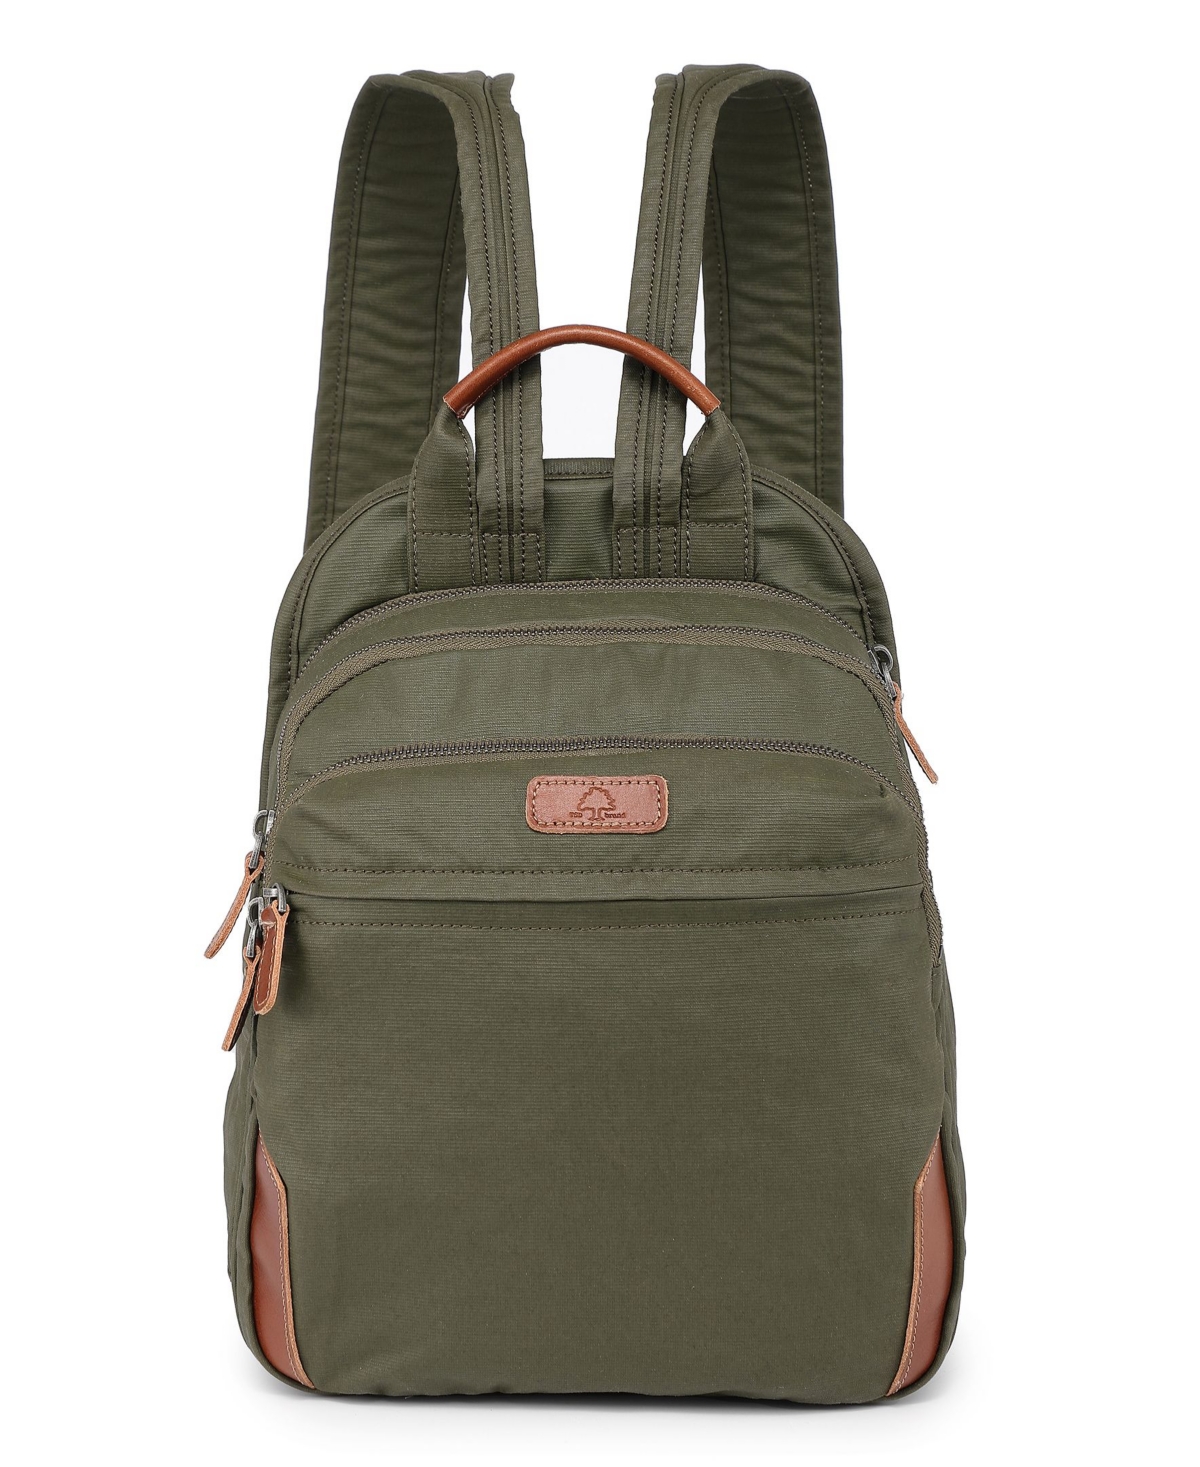 Turtle Cove Canvas Backpack - Navy